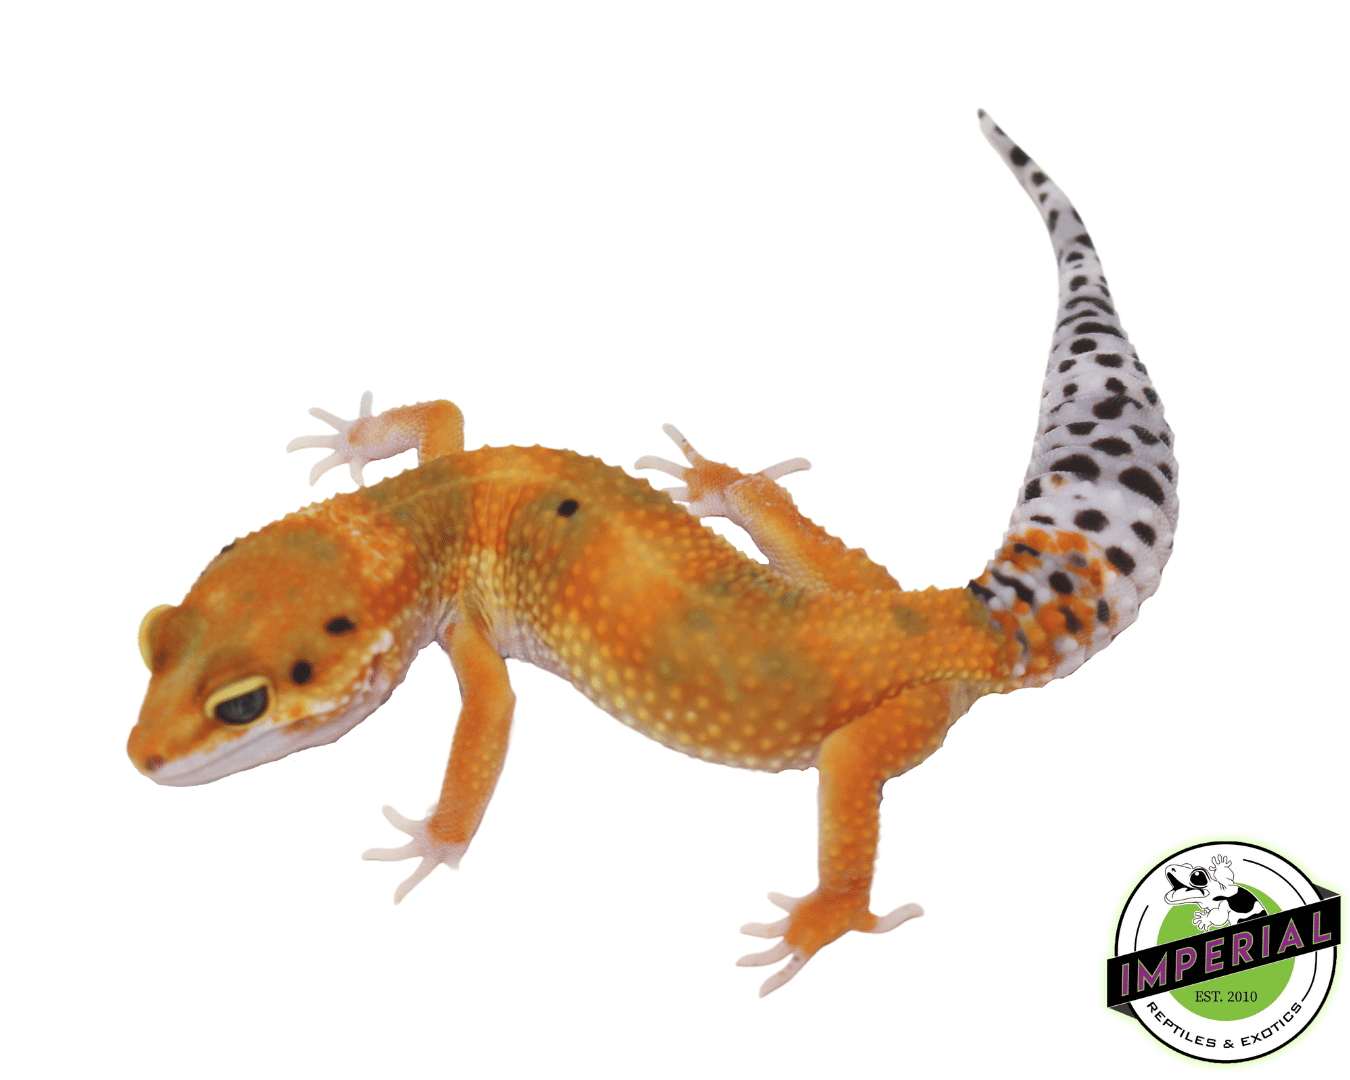 Sunglow Og Leopard Gecko For Sale Imperial Reptiles Imperial Reptiles And Exotics